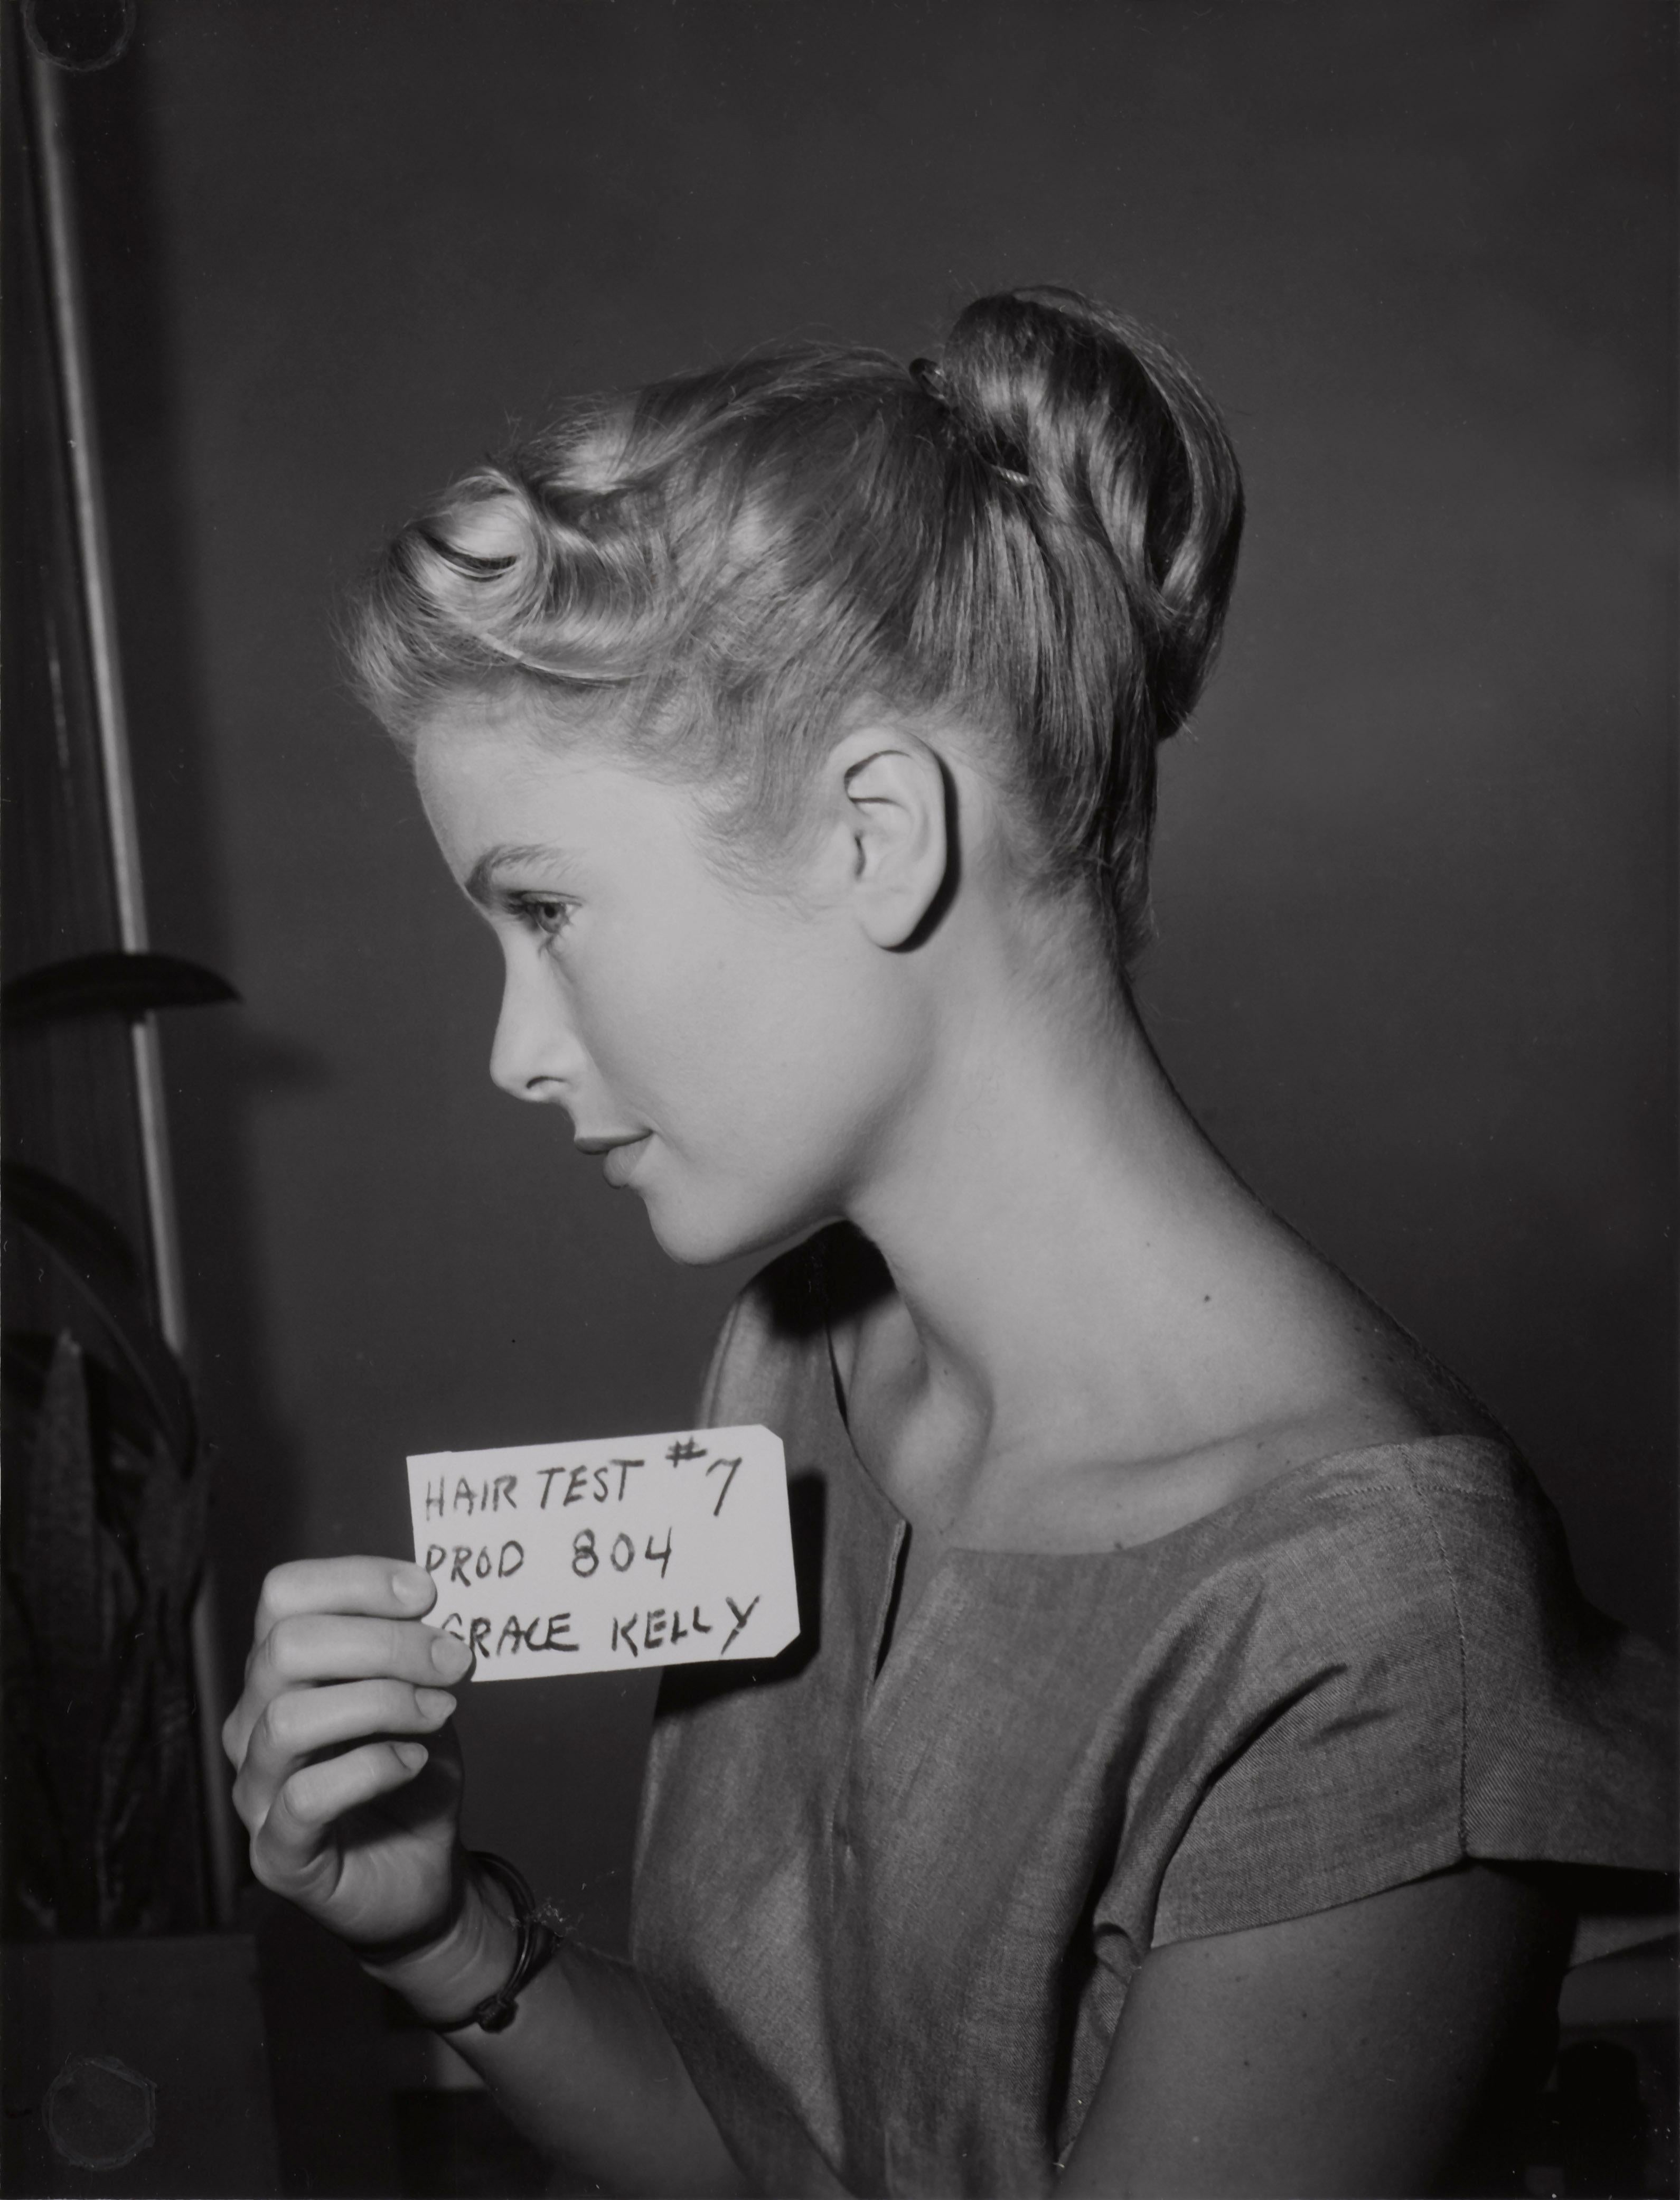 Original black photograph showing Grace Kelly hair test for Dial M for Murder taken in 1952
The film was released in 1954
This photo is conservation framed in an Obeche wood frame with card mounts and UV Plexiglas glass.
The size given is before